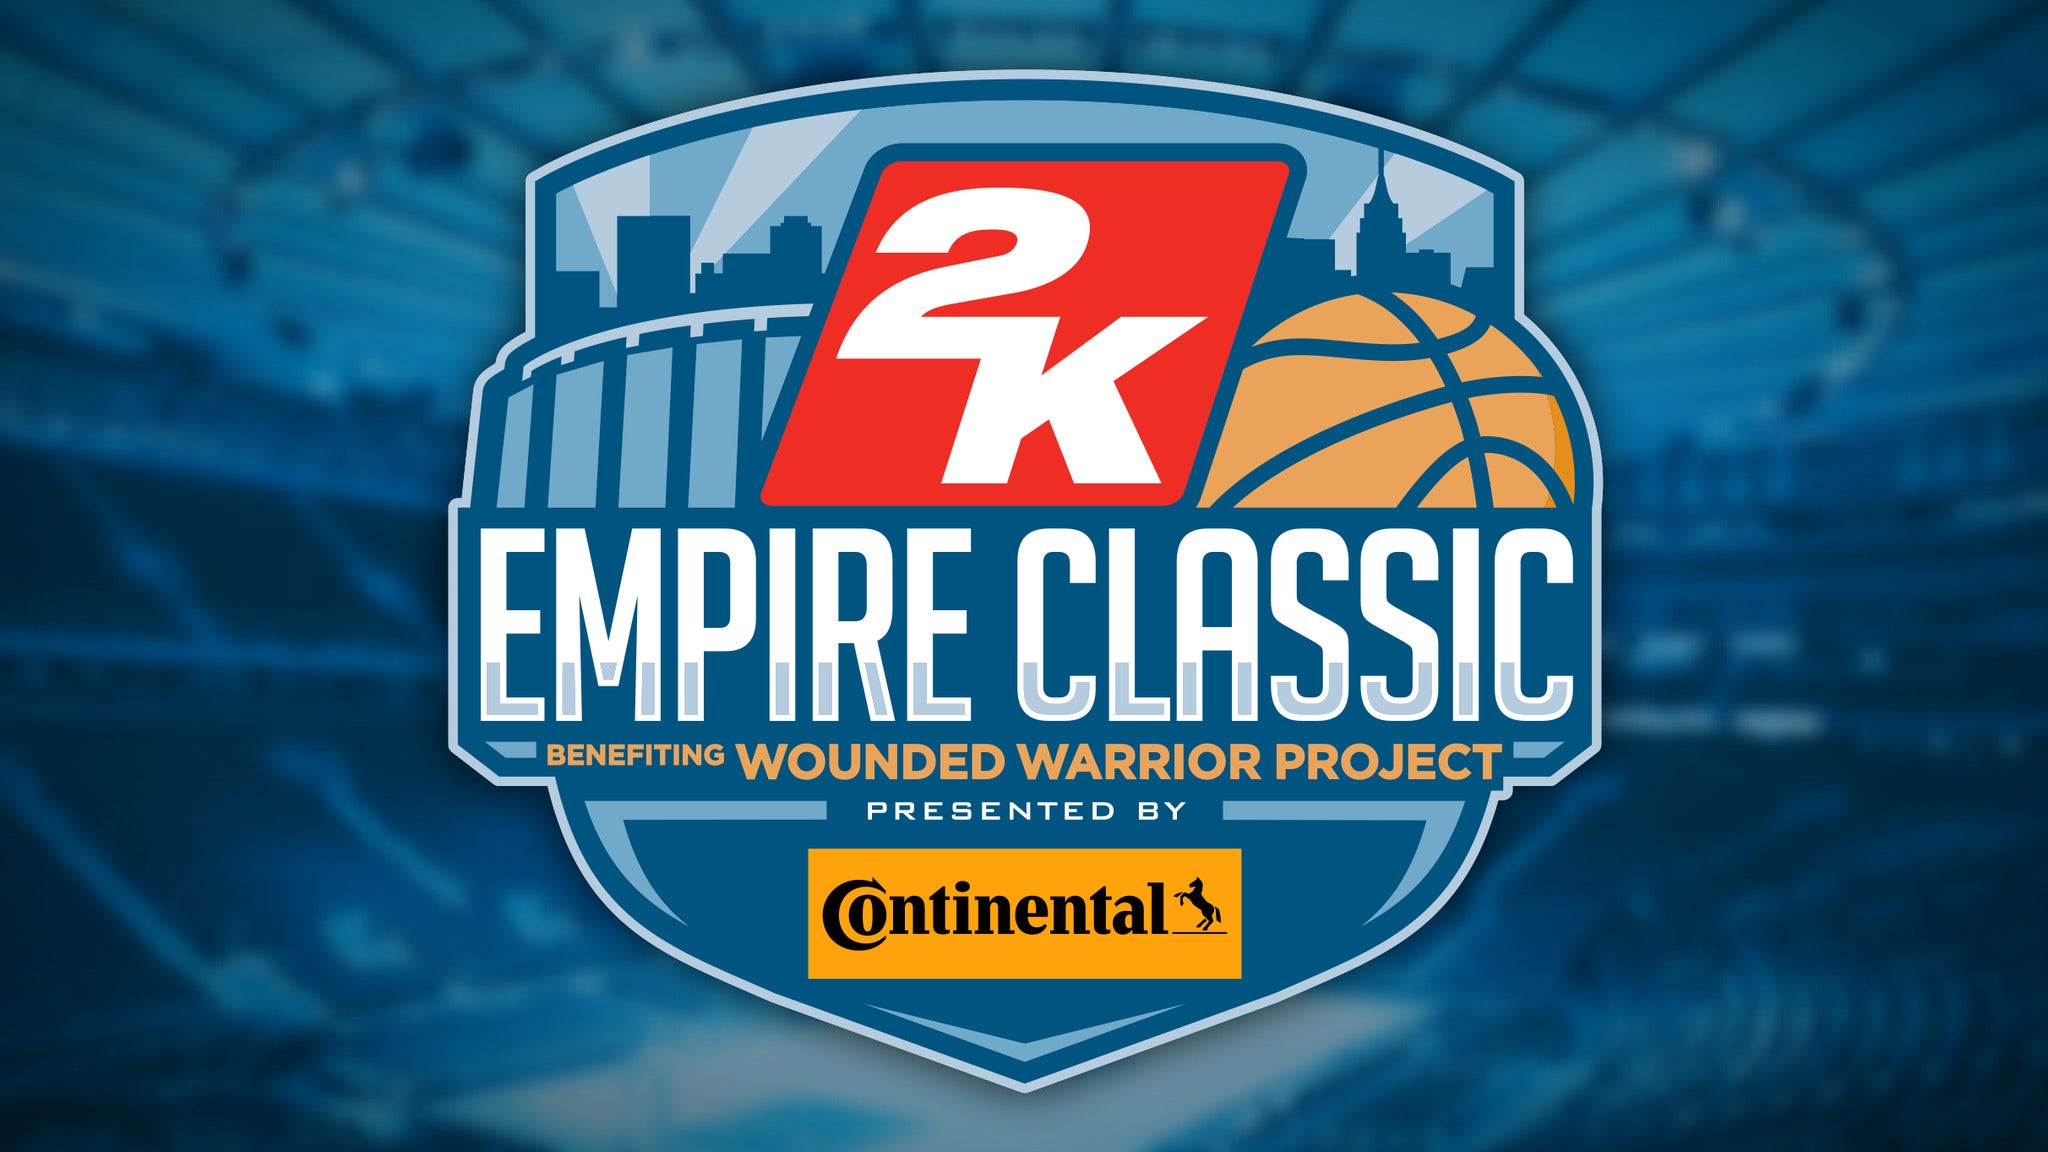 Empire Classic Benefiting Wounded